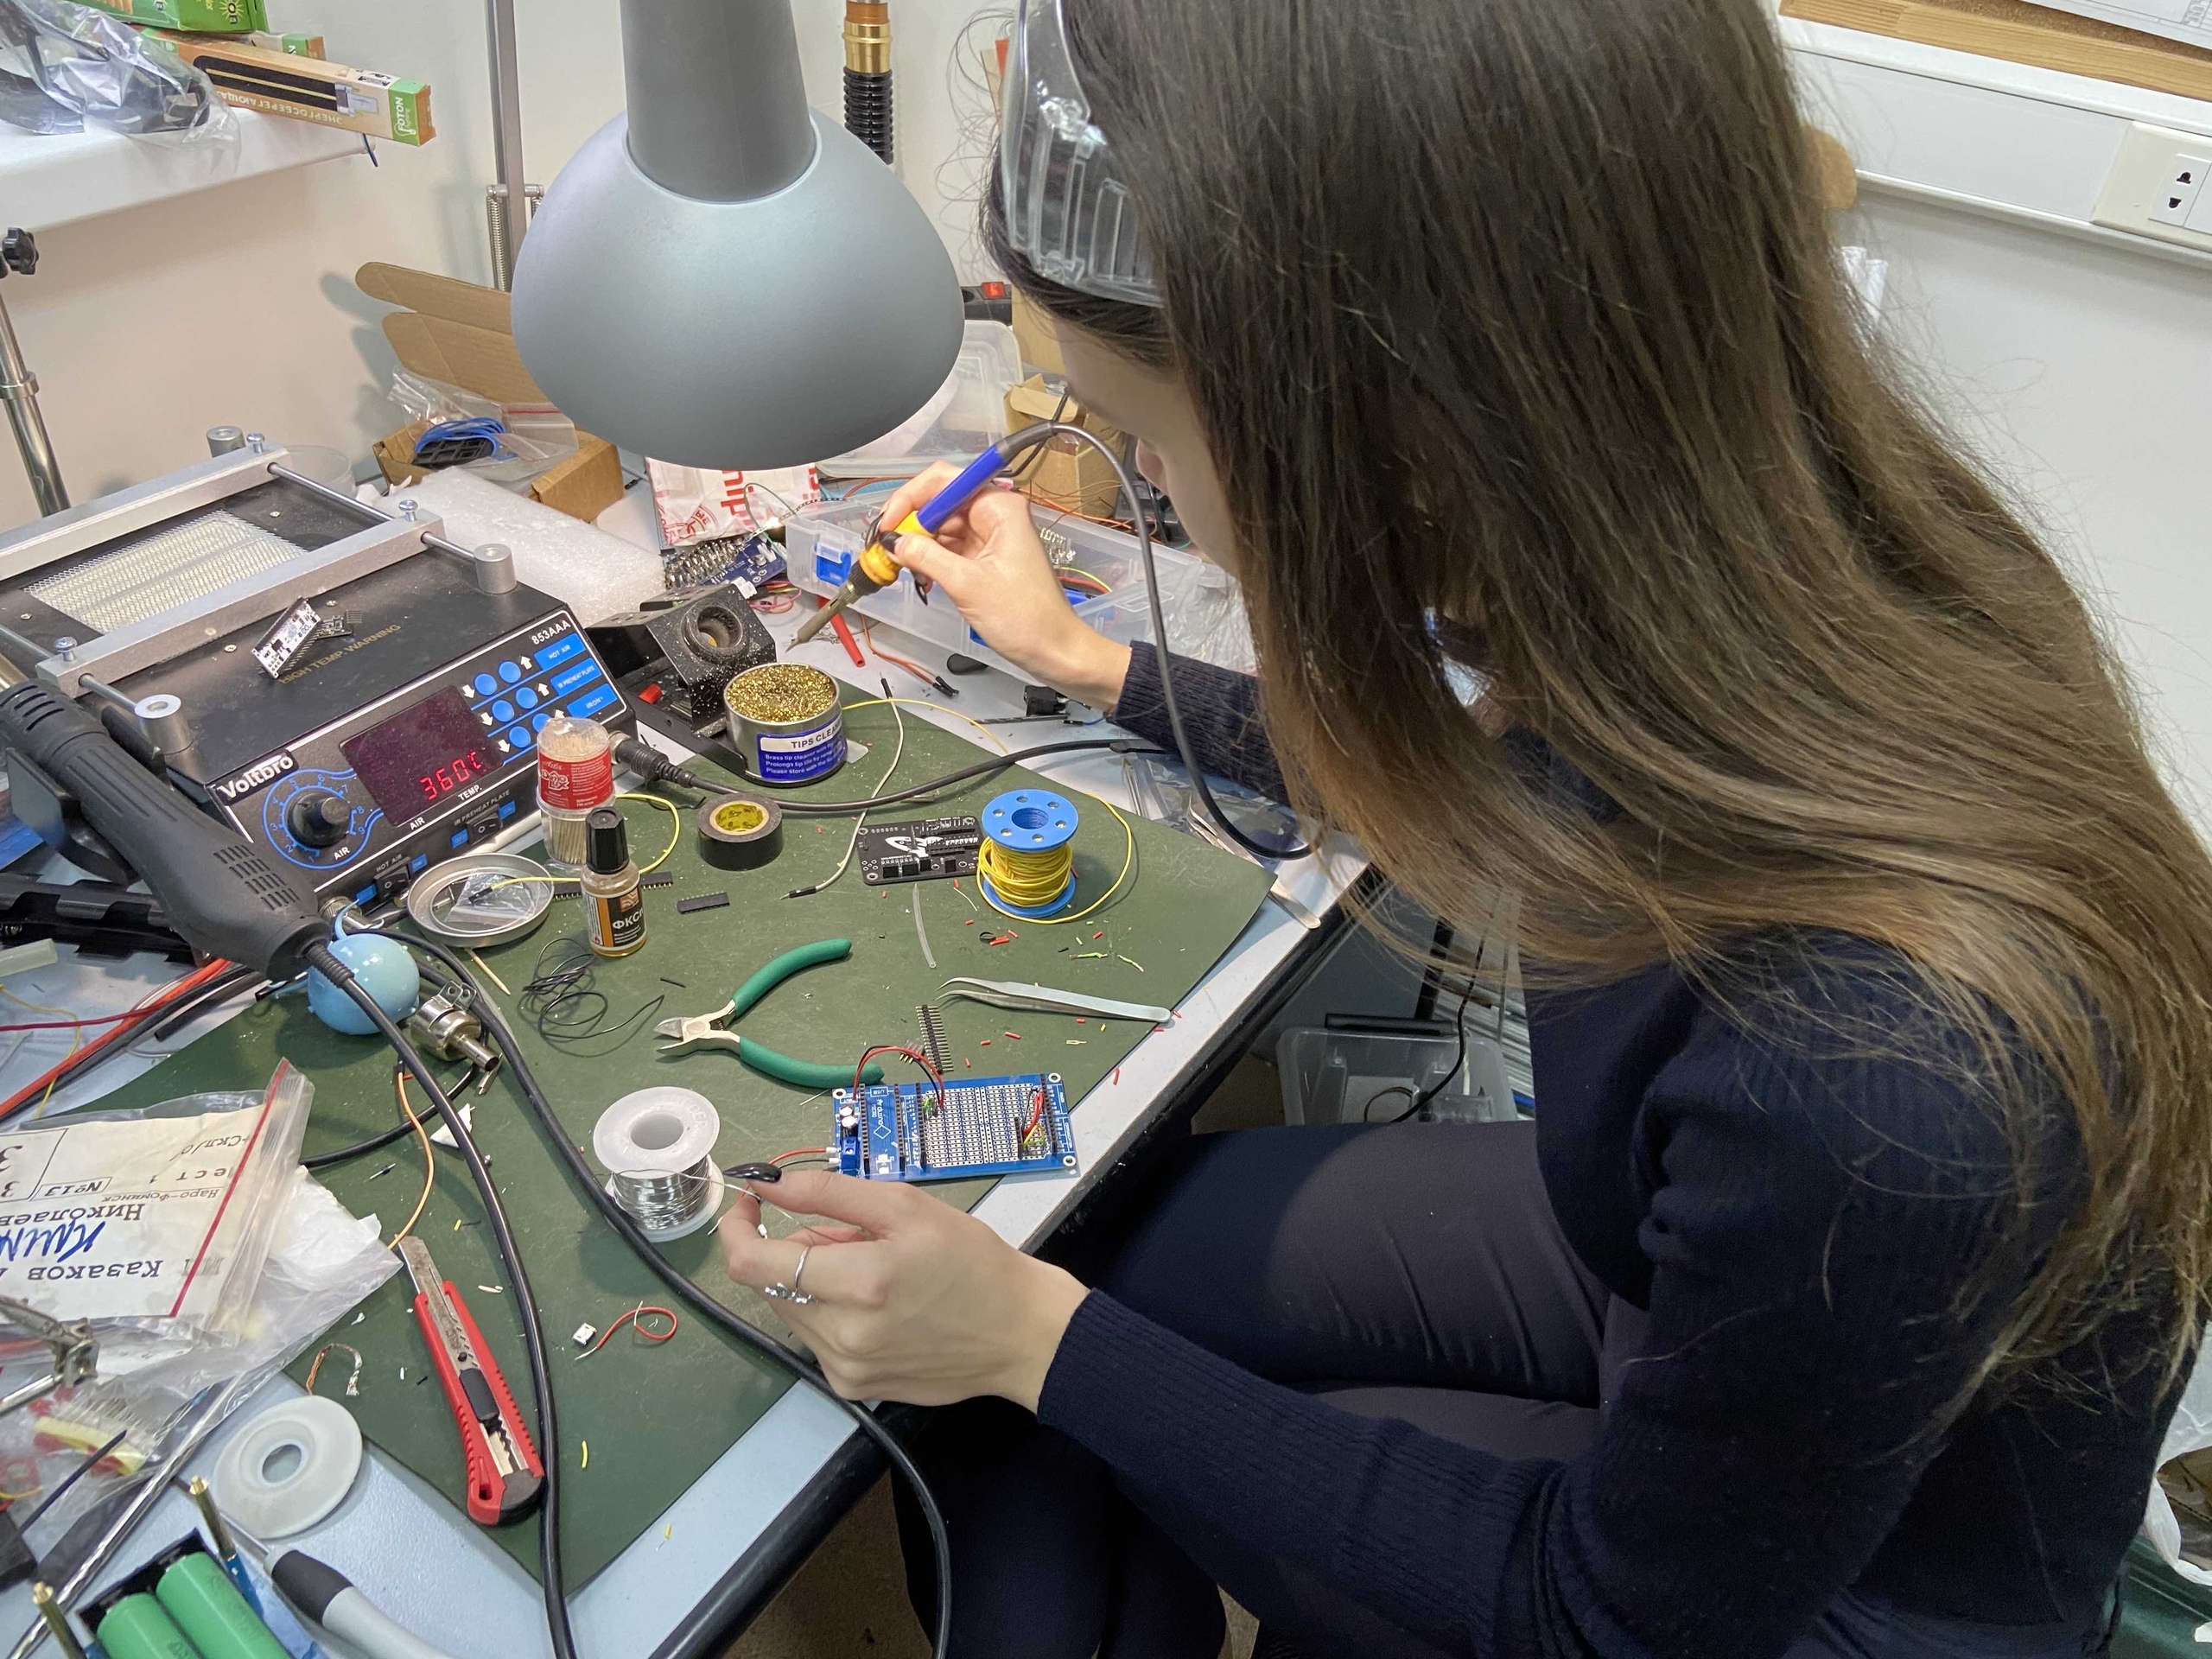 Soldering the circuit board